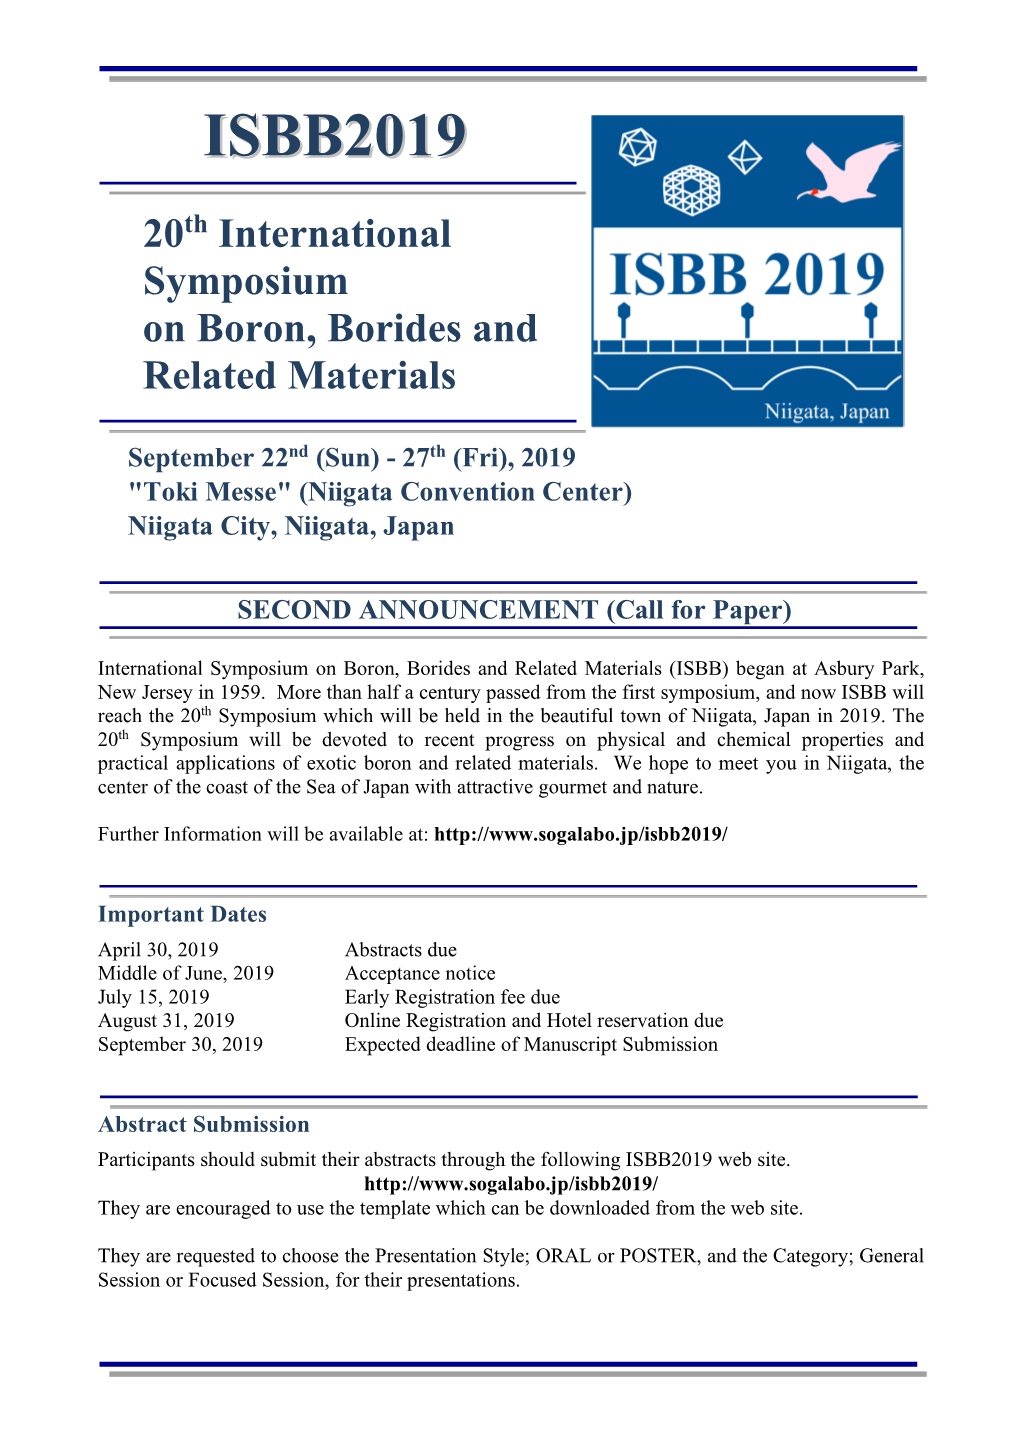 ISBB2019 Second Announcement V2